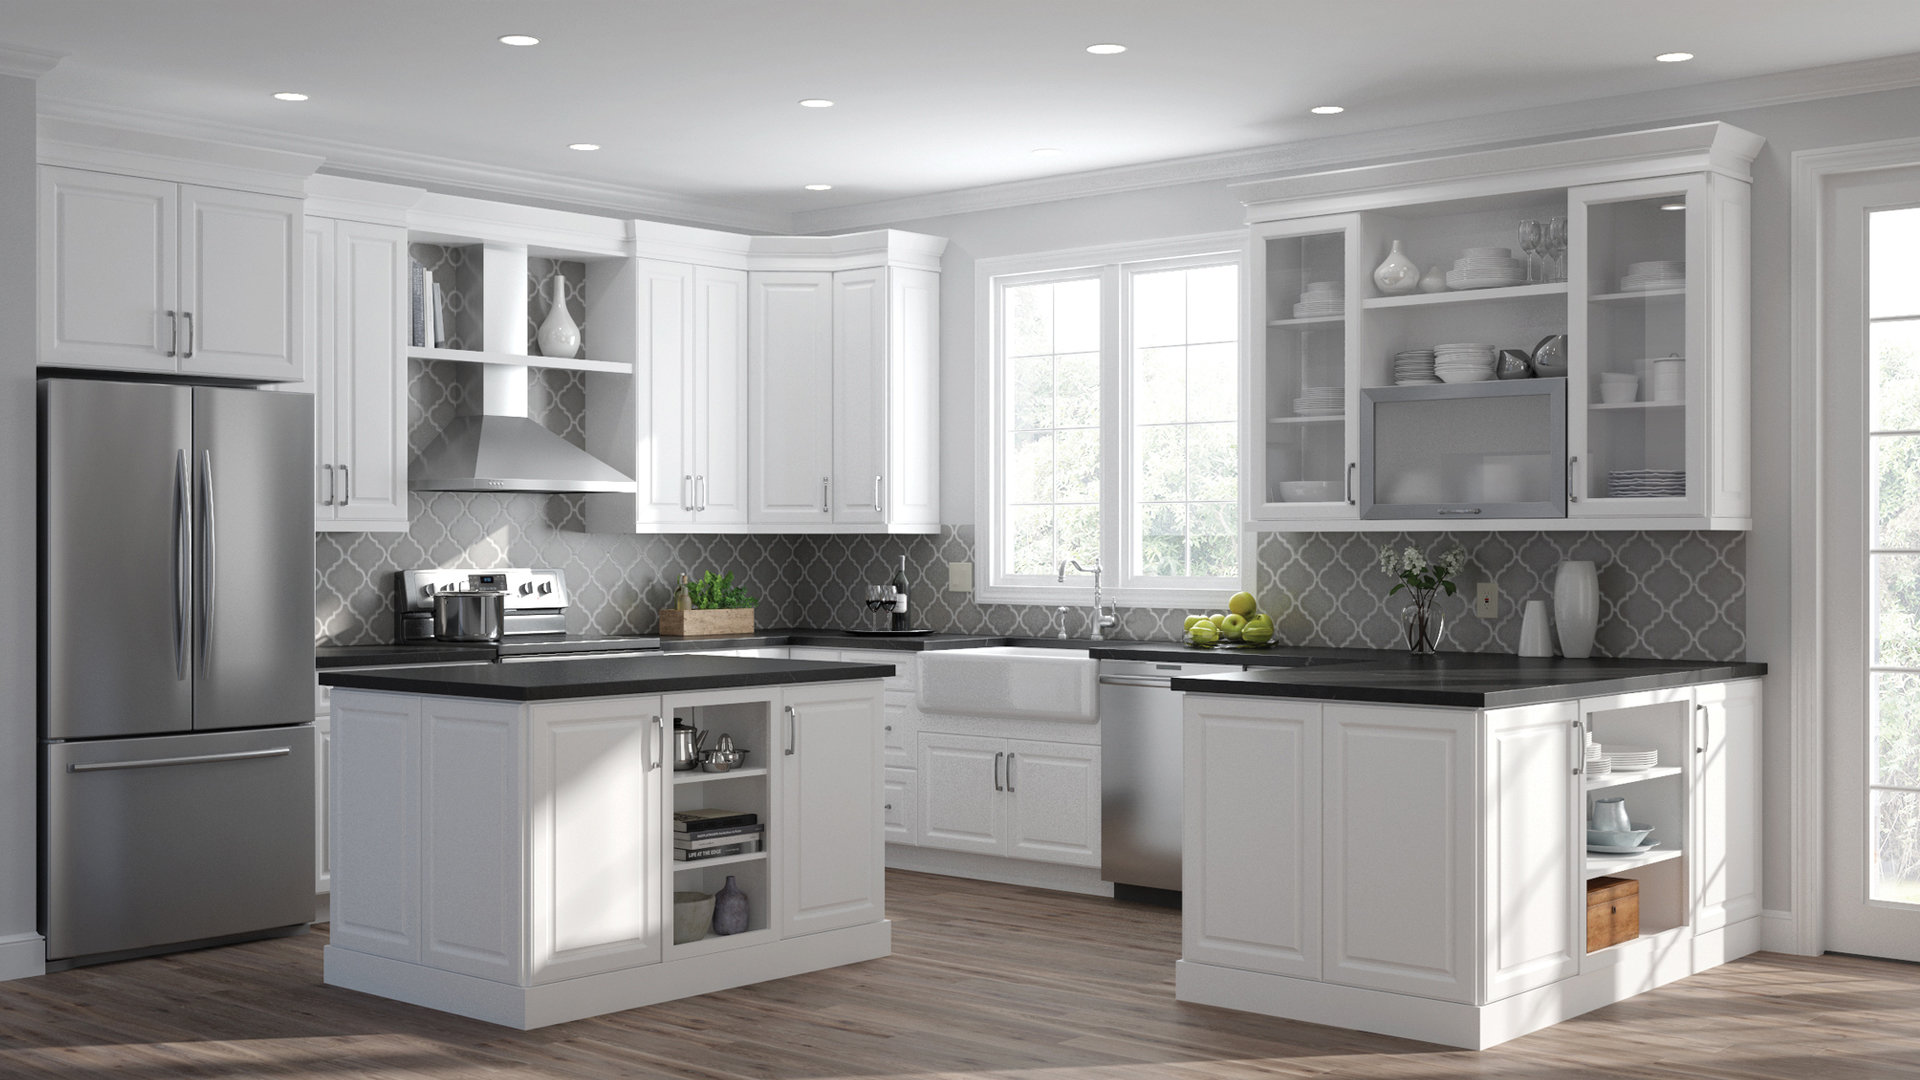 Elgin Wall Cabinets in White - Kitchen - The Home Depot